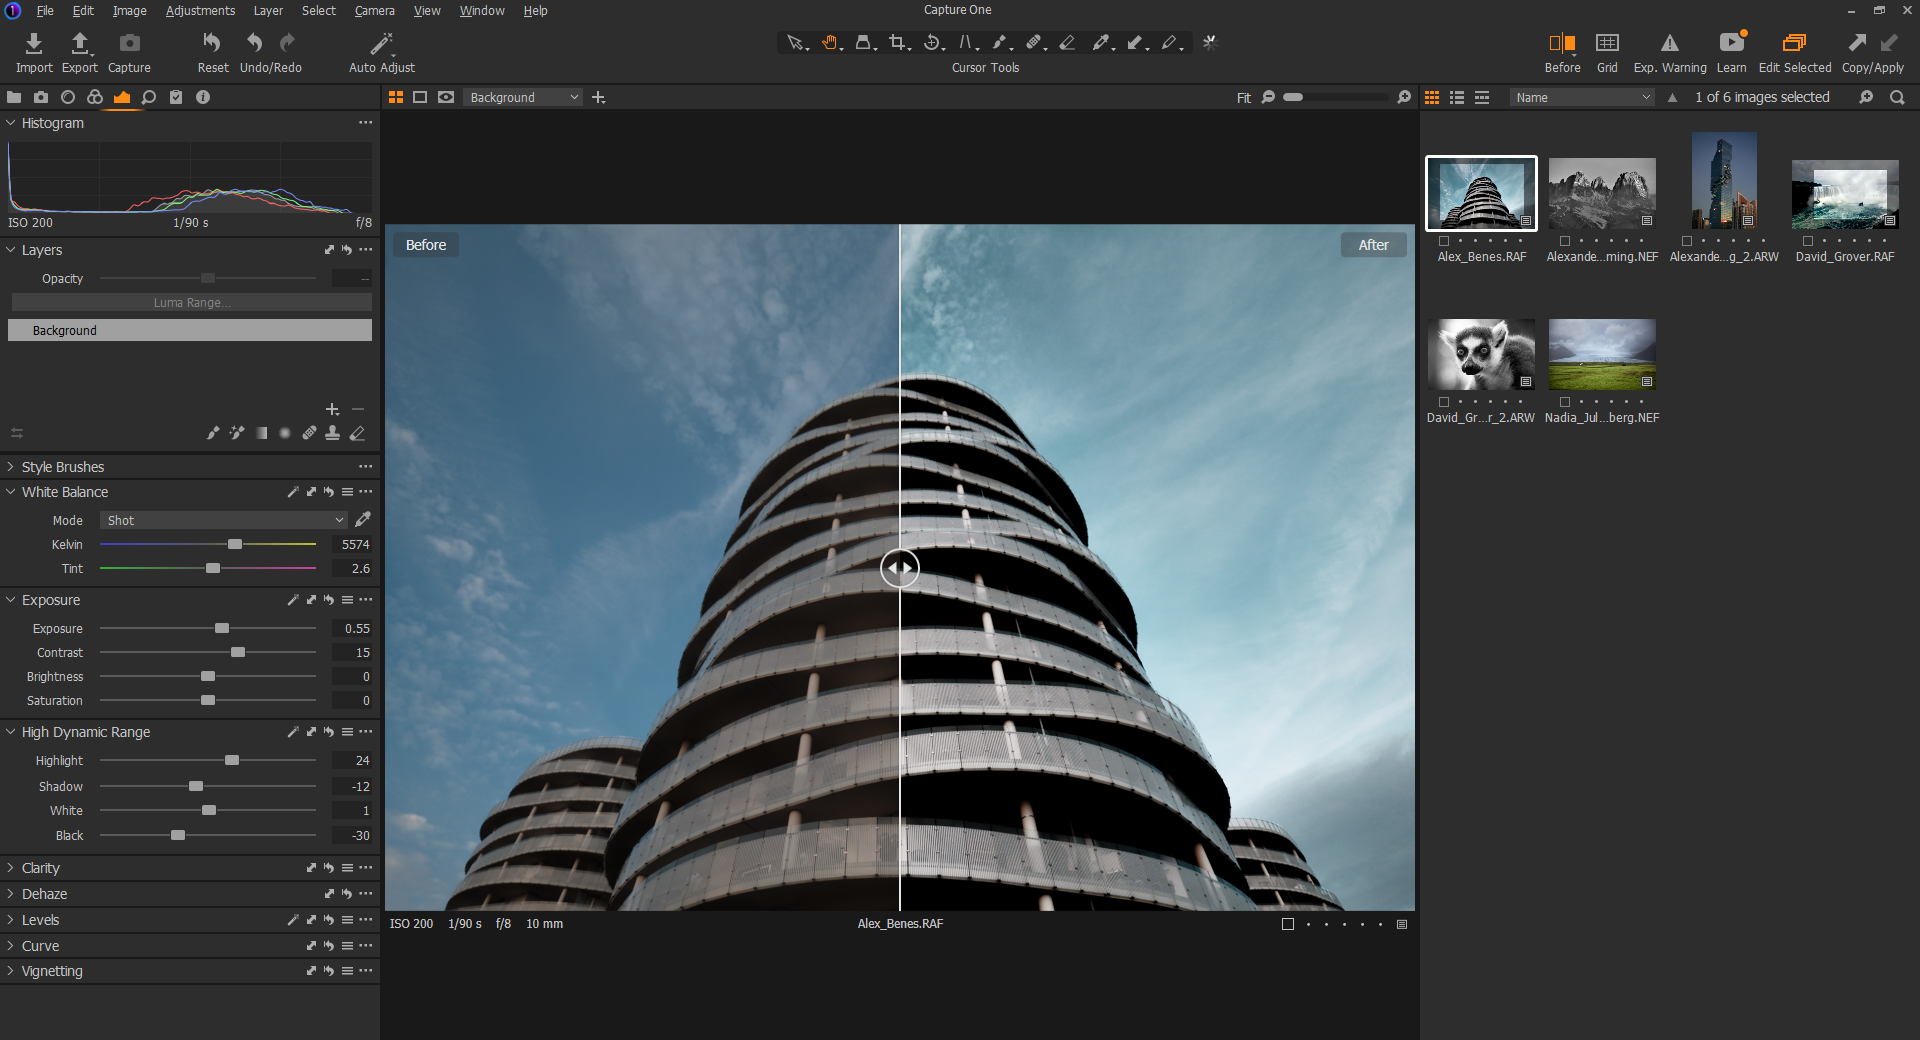 Screenshot showing a before and after edit on Capture One